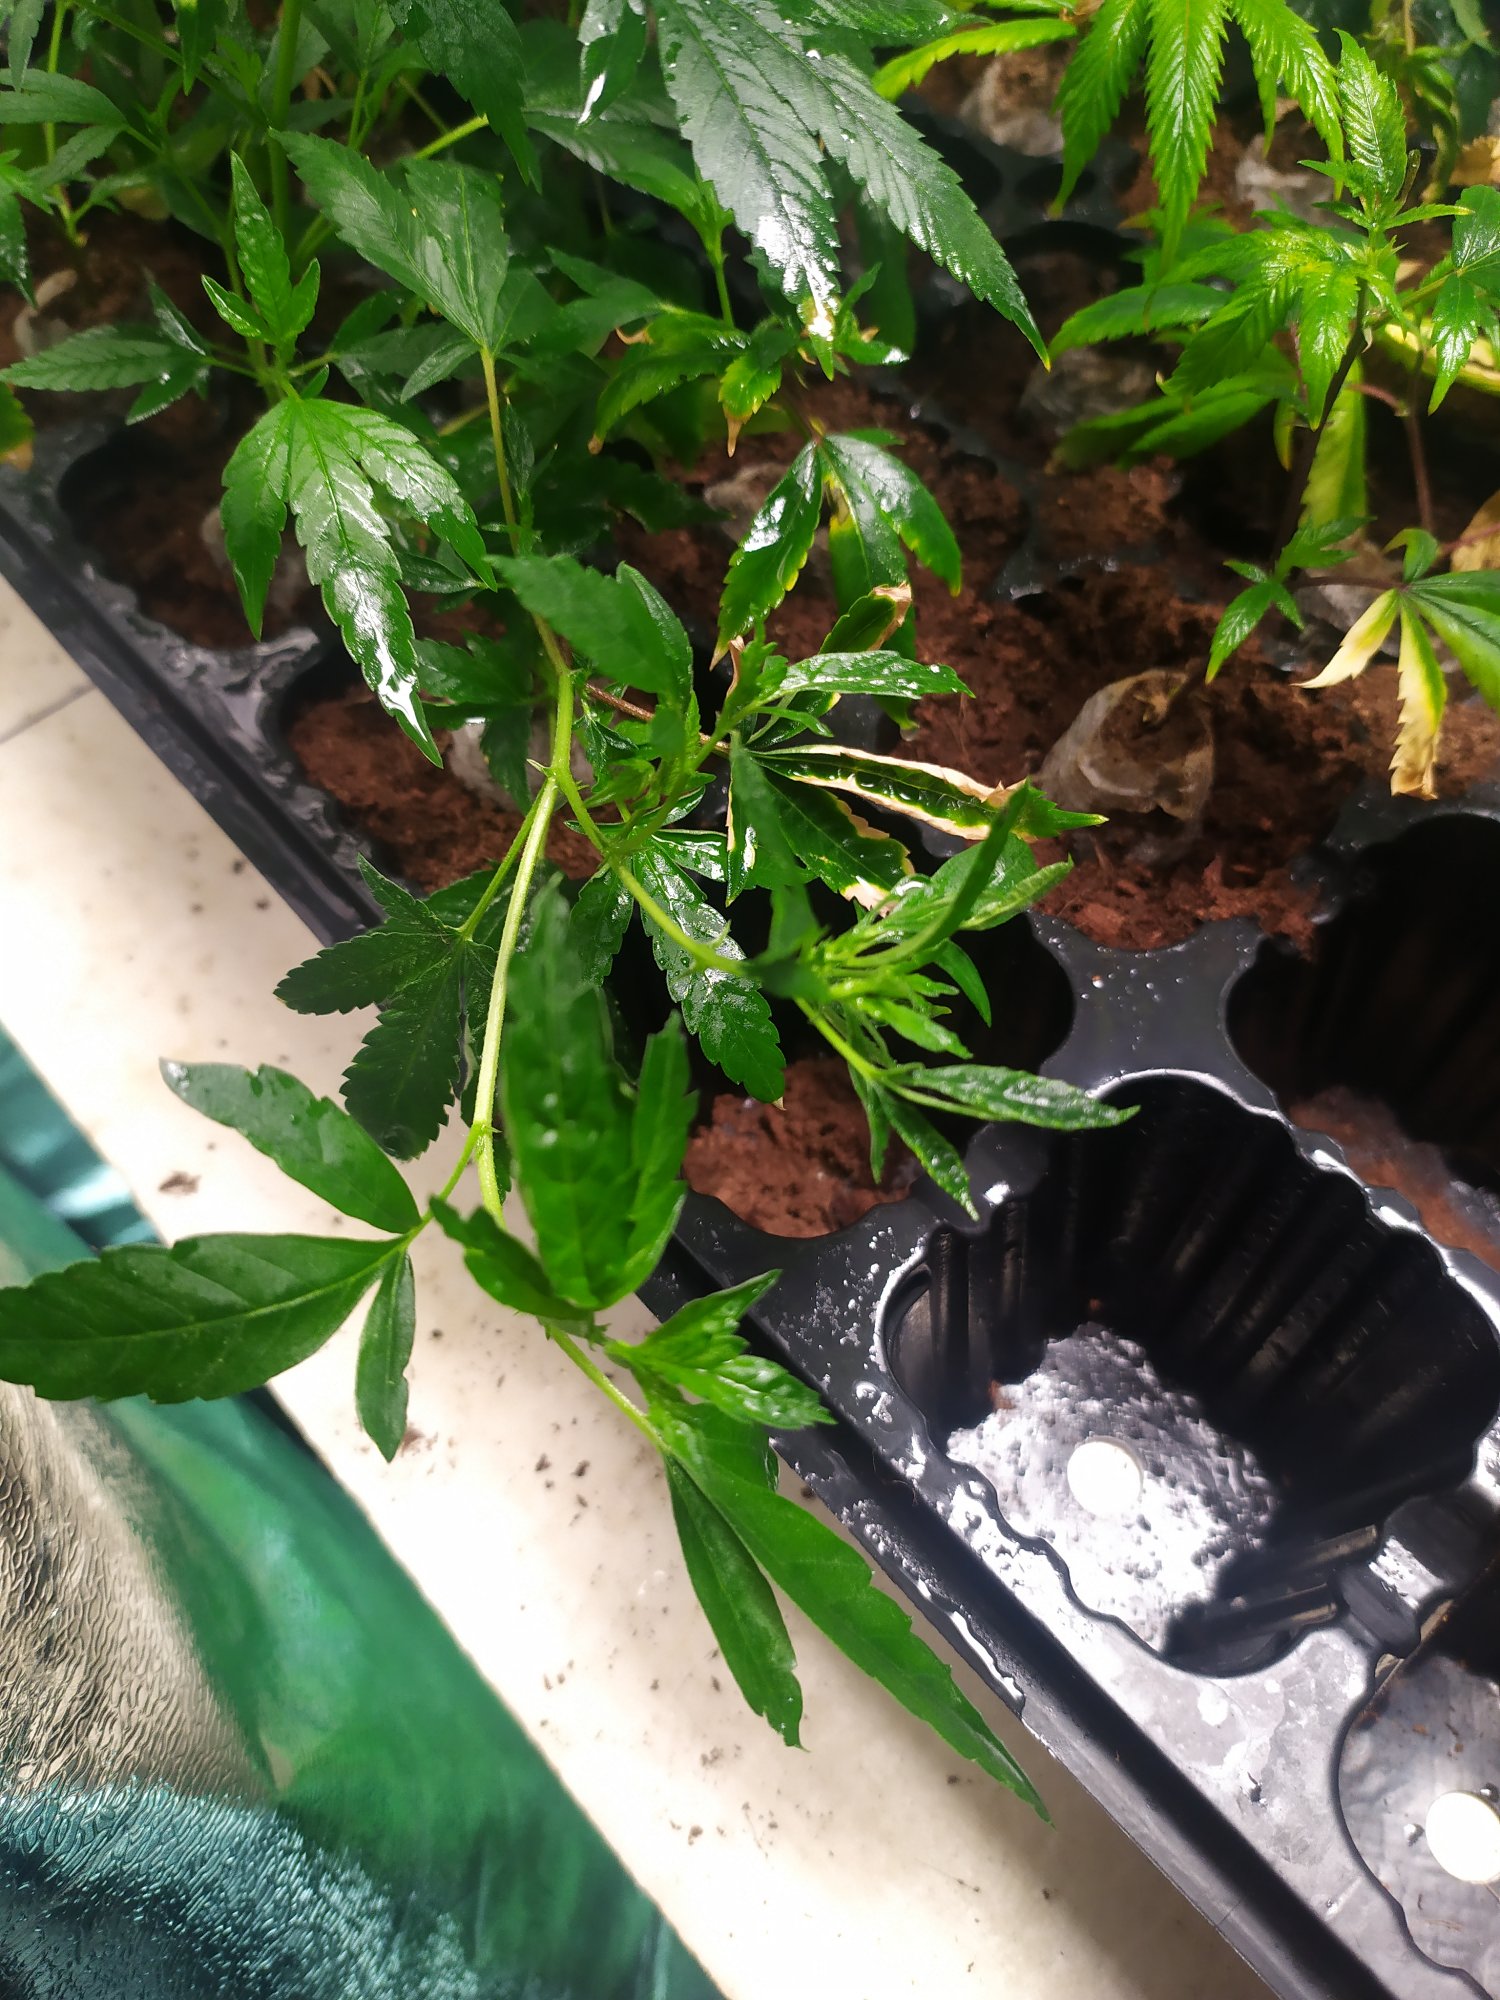 Deformed leaves on rooted clones wtf